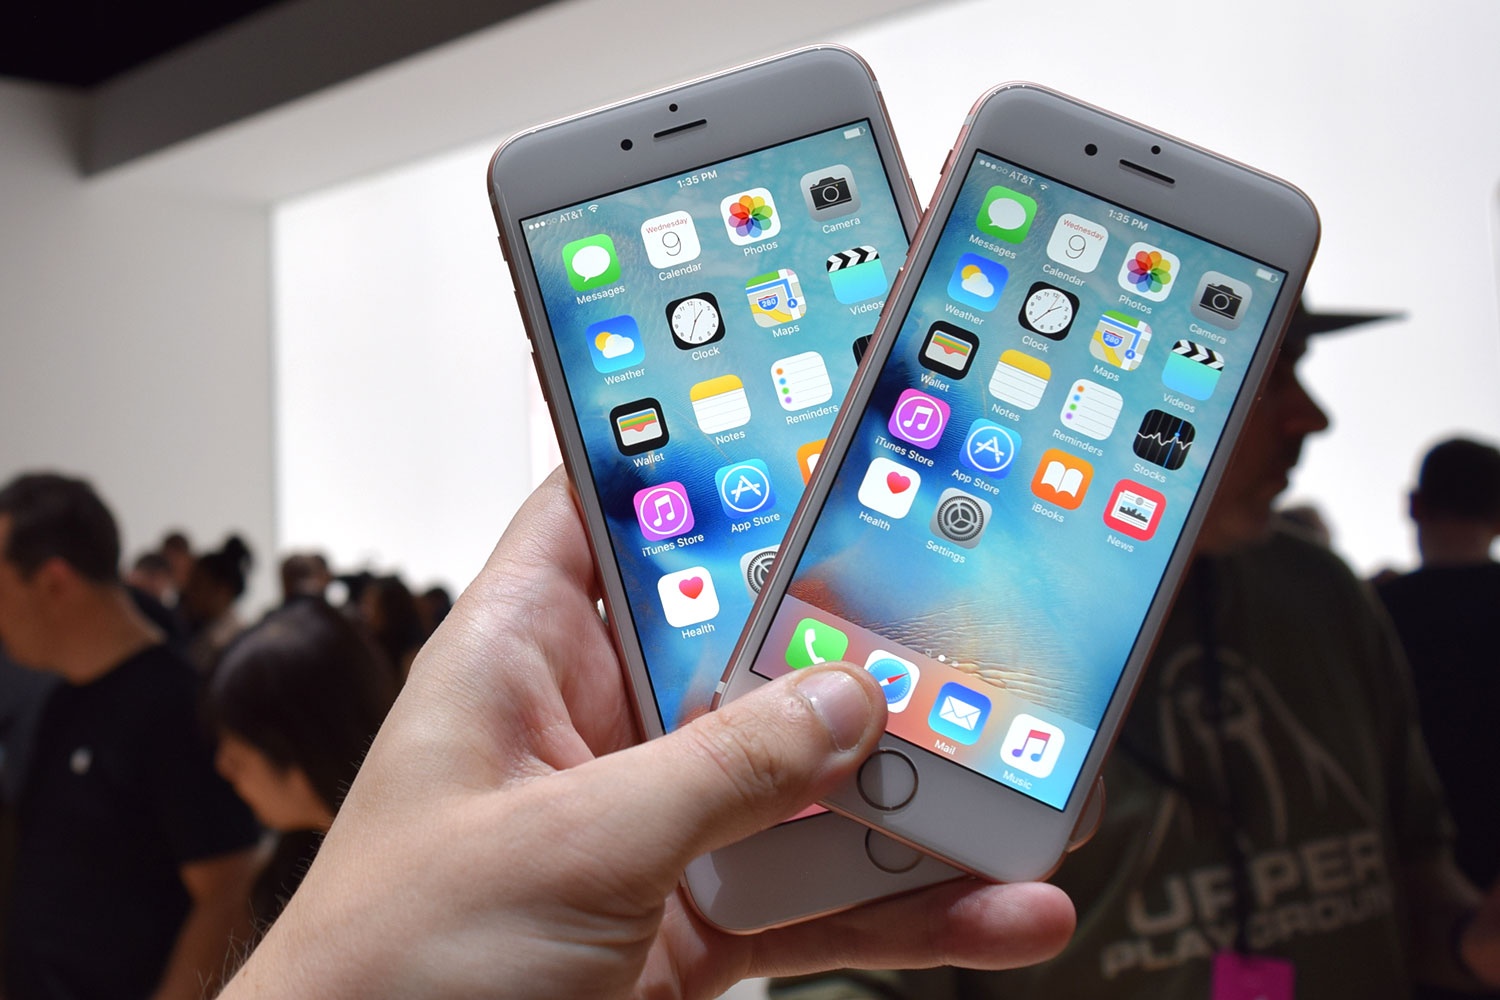 iphone-6s-hands-on-front-angles-1500x1000